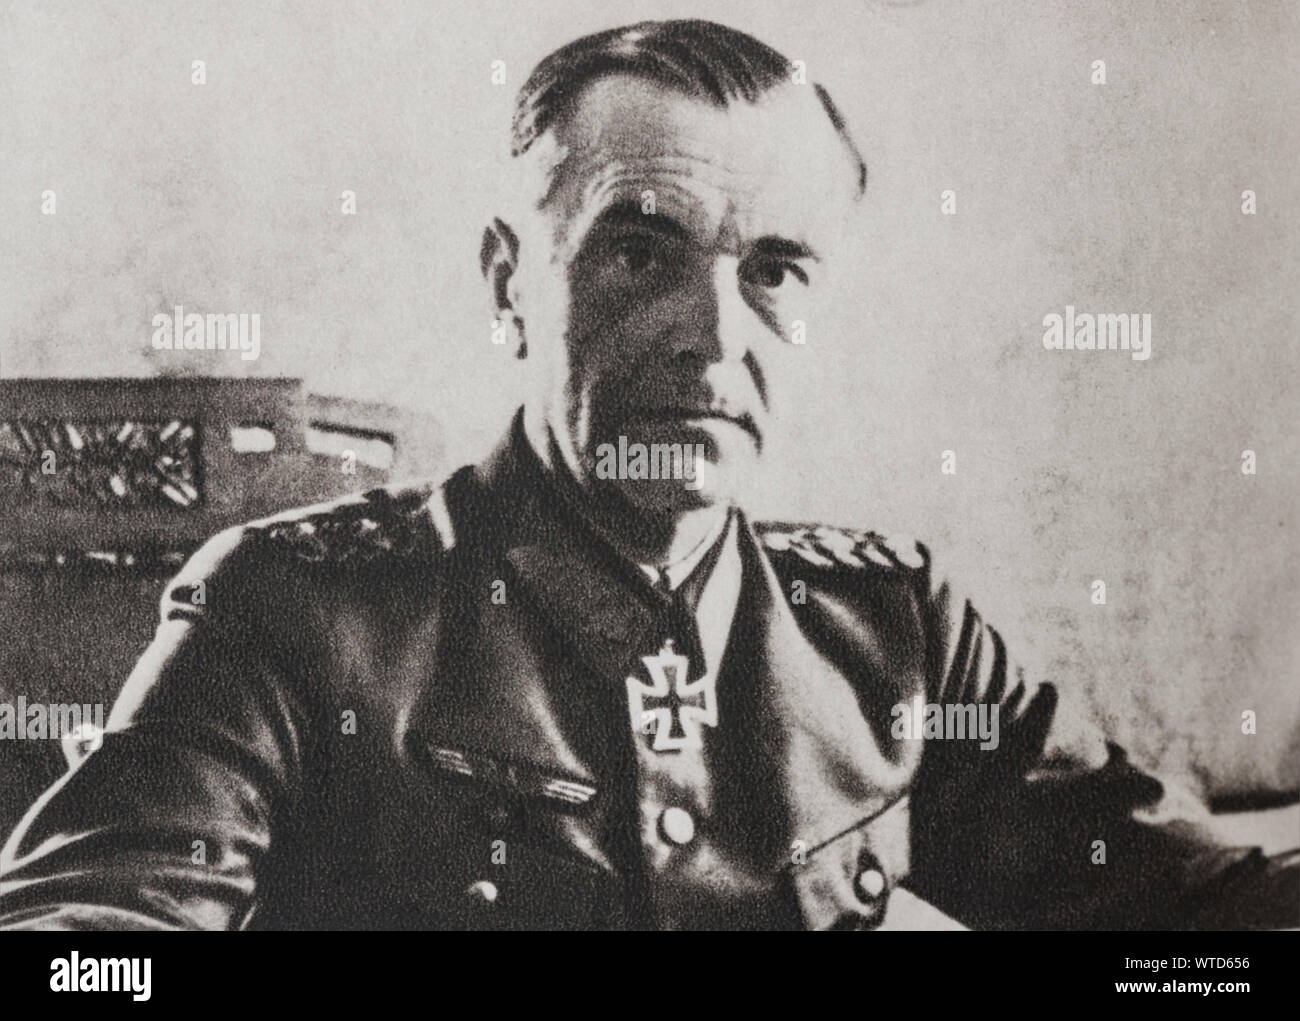 Friedrich Paulus (1890 – 1957) was a German field marshal during World War II, who commanded the 6th Army during the Battle of Stalingrad (August 1942 Stock Photo